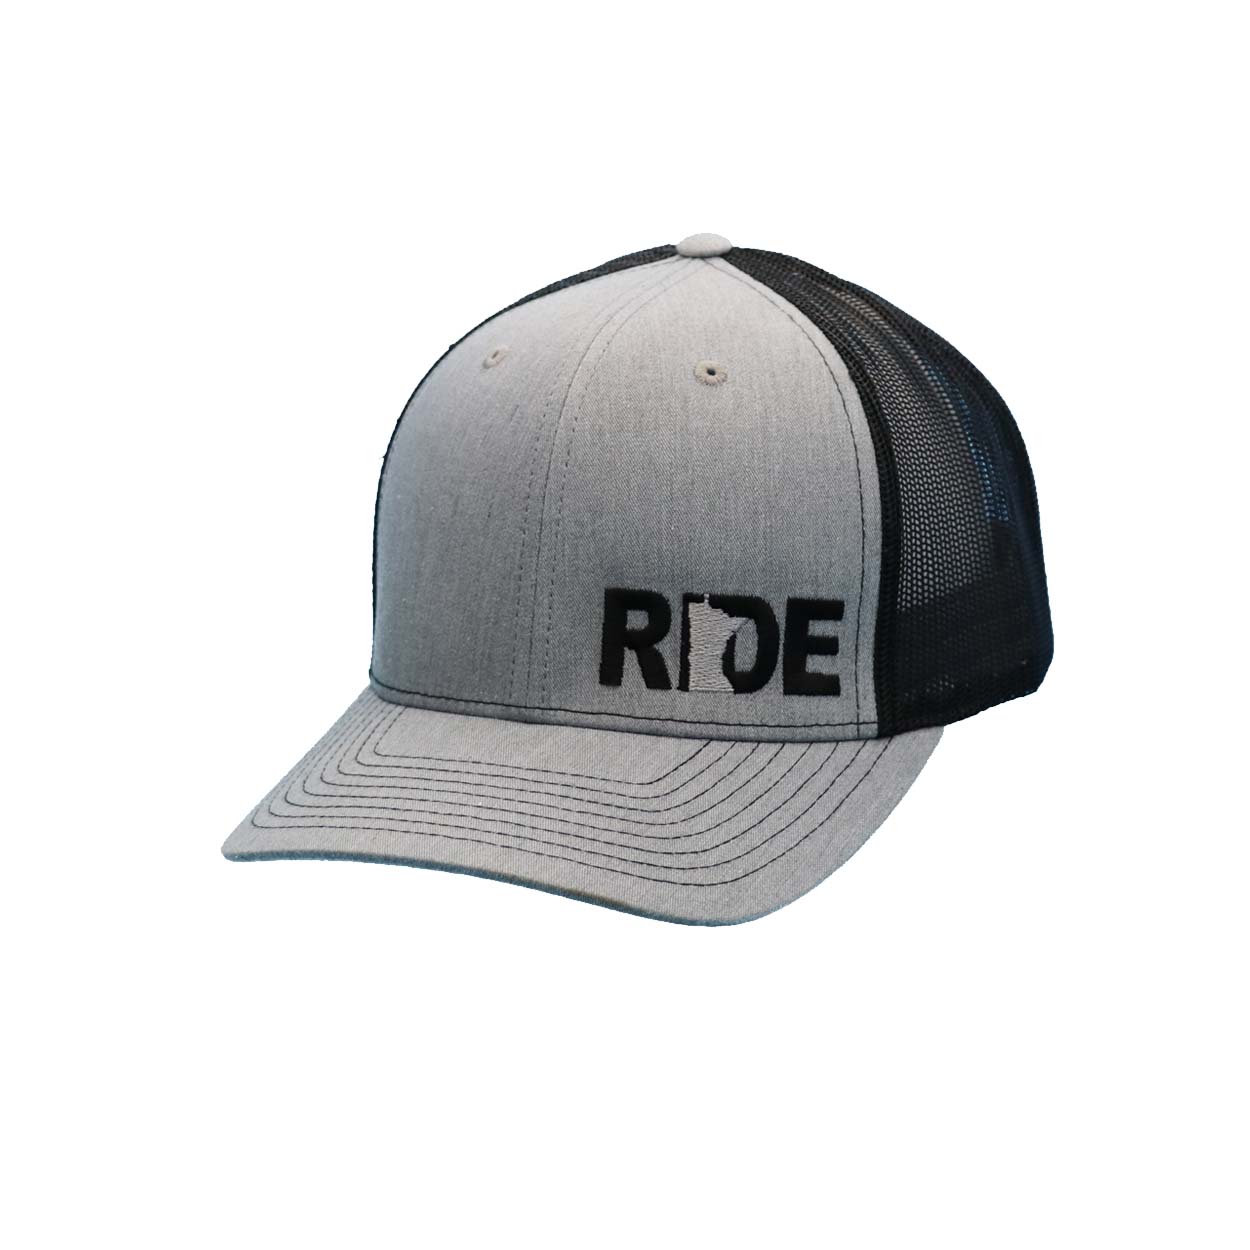 Ride Minnesota Night Out Embroidered Snapback Trucker Hat Heather Gray/Black